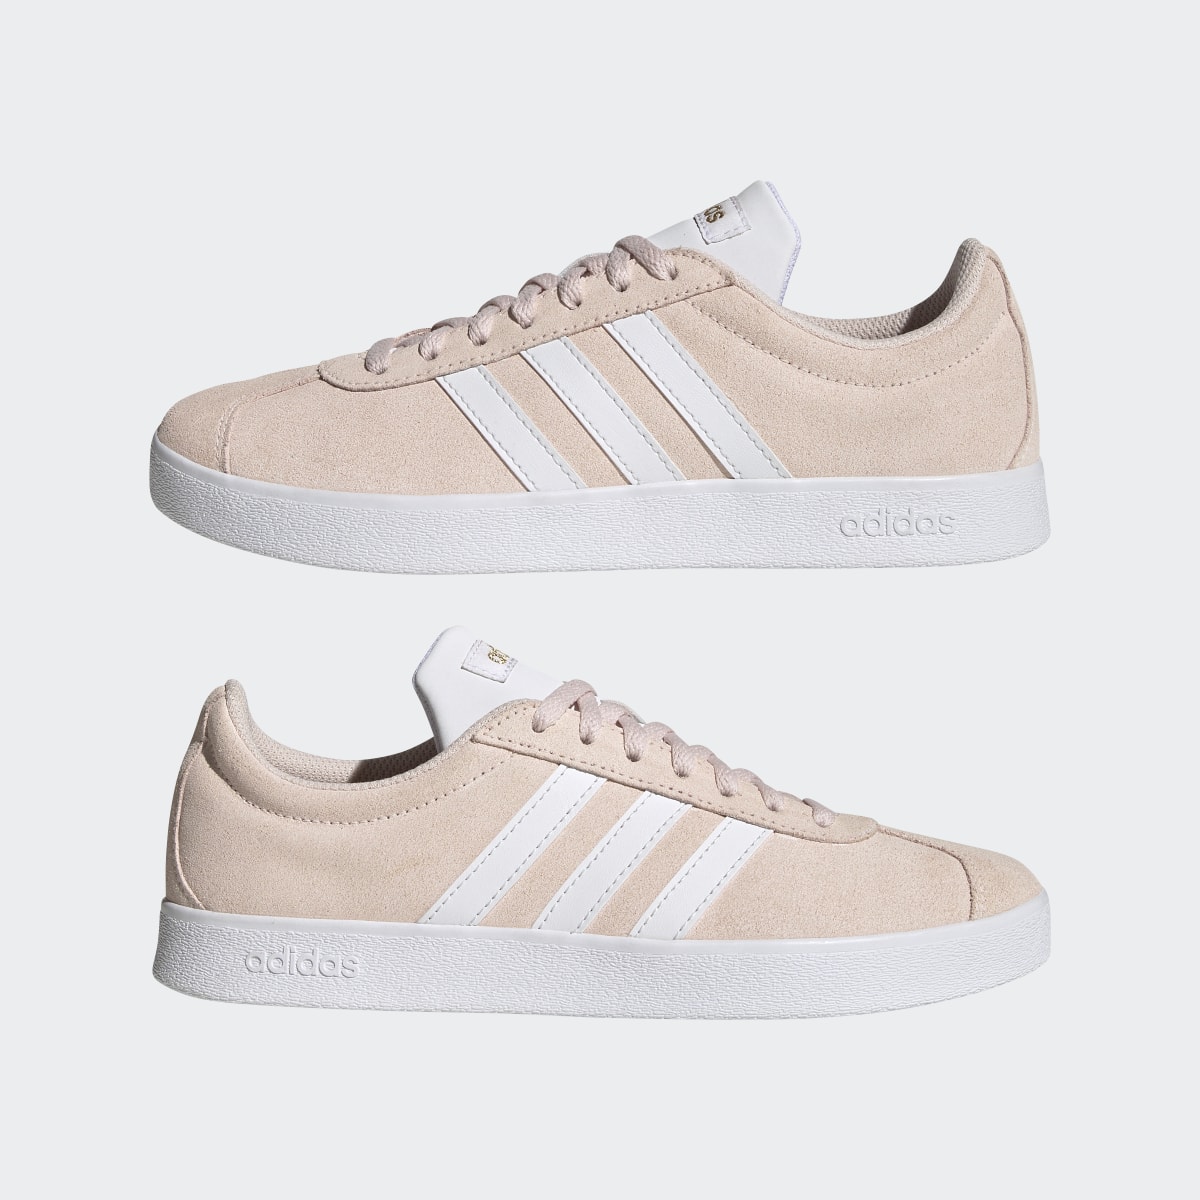 Adidas VL Court 2.0 Suede Shoes. 8